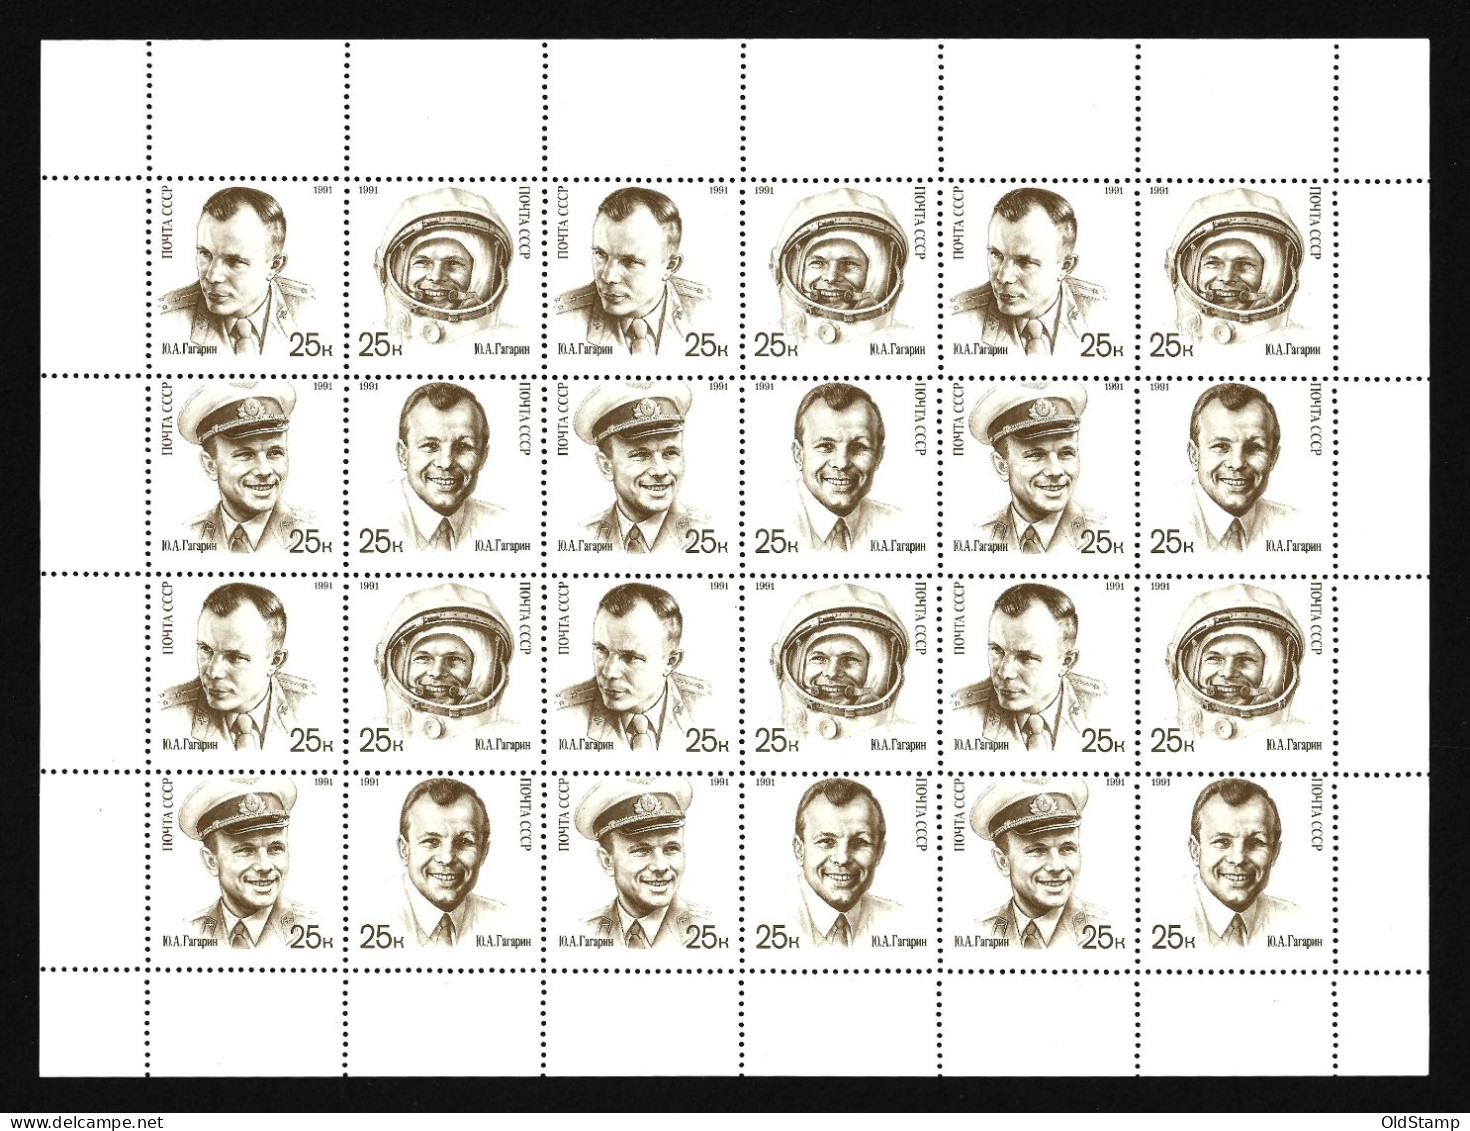 SPACE USSR Russia 1991 Full Sheet MNH Gagarin 30th Anniversary First Man In Space Cosmonautics Stamps Mi. 6185 - 6188 - Verzamelingen